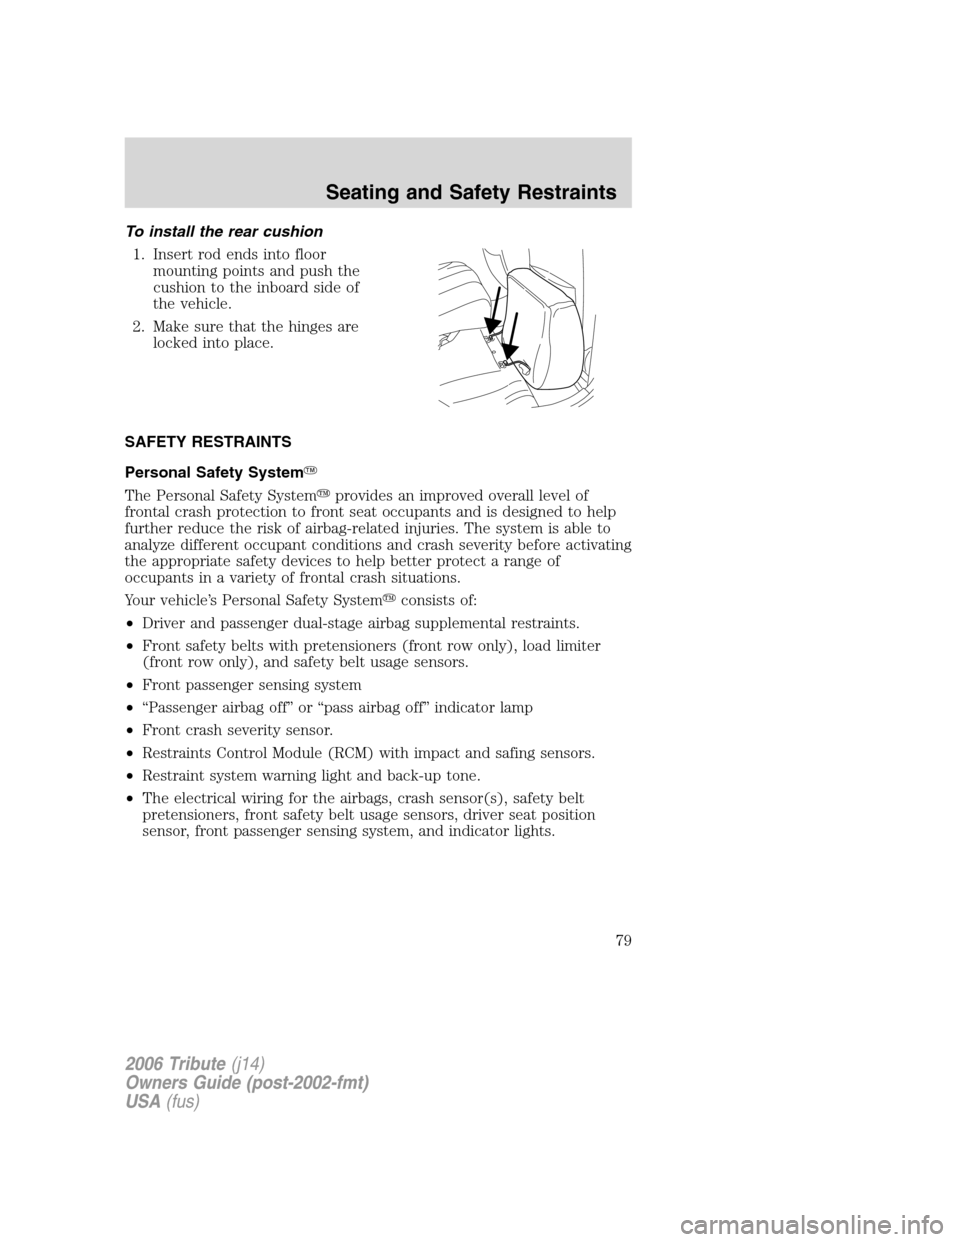 MAZDA MODEL TRIBUTE 2006  Owners Manual (in English) To install the rear cushion
1. Insert rod ends into floor
mounting points and push the
cushion to the inboard side of
the vehicle.
2. Make sure that the hinges are
locked into place.
SAFETY RESTRAINTS